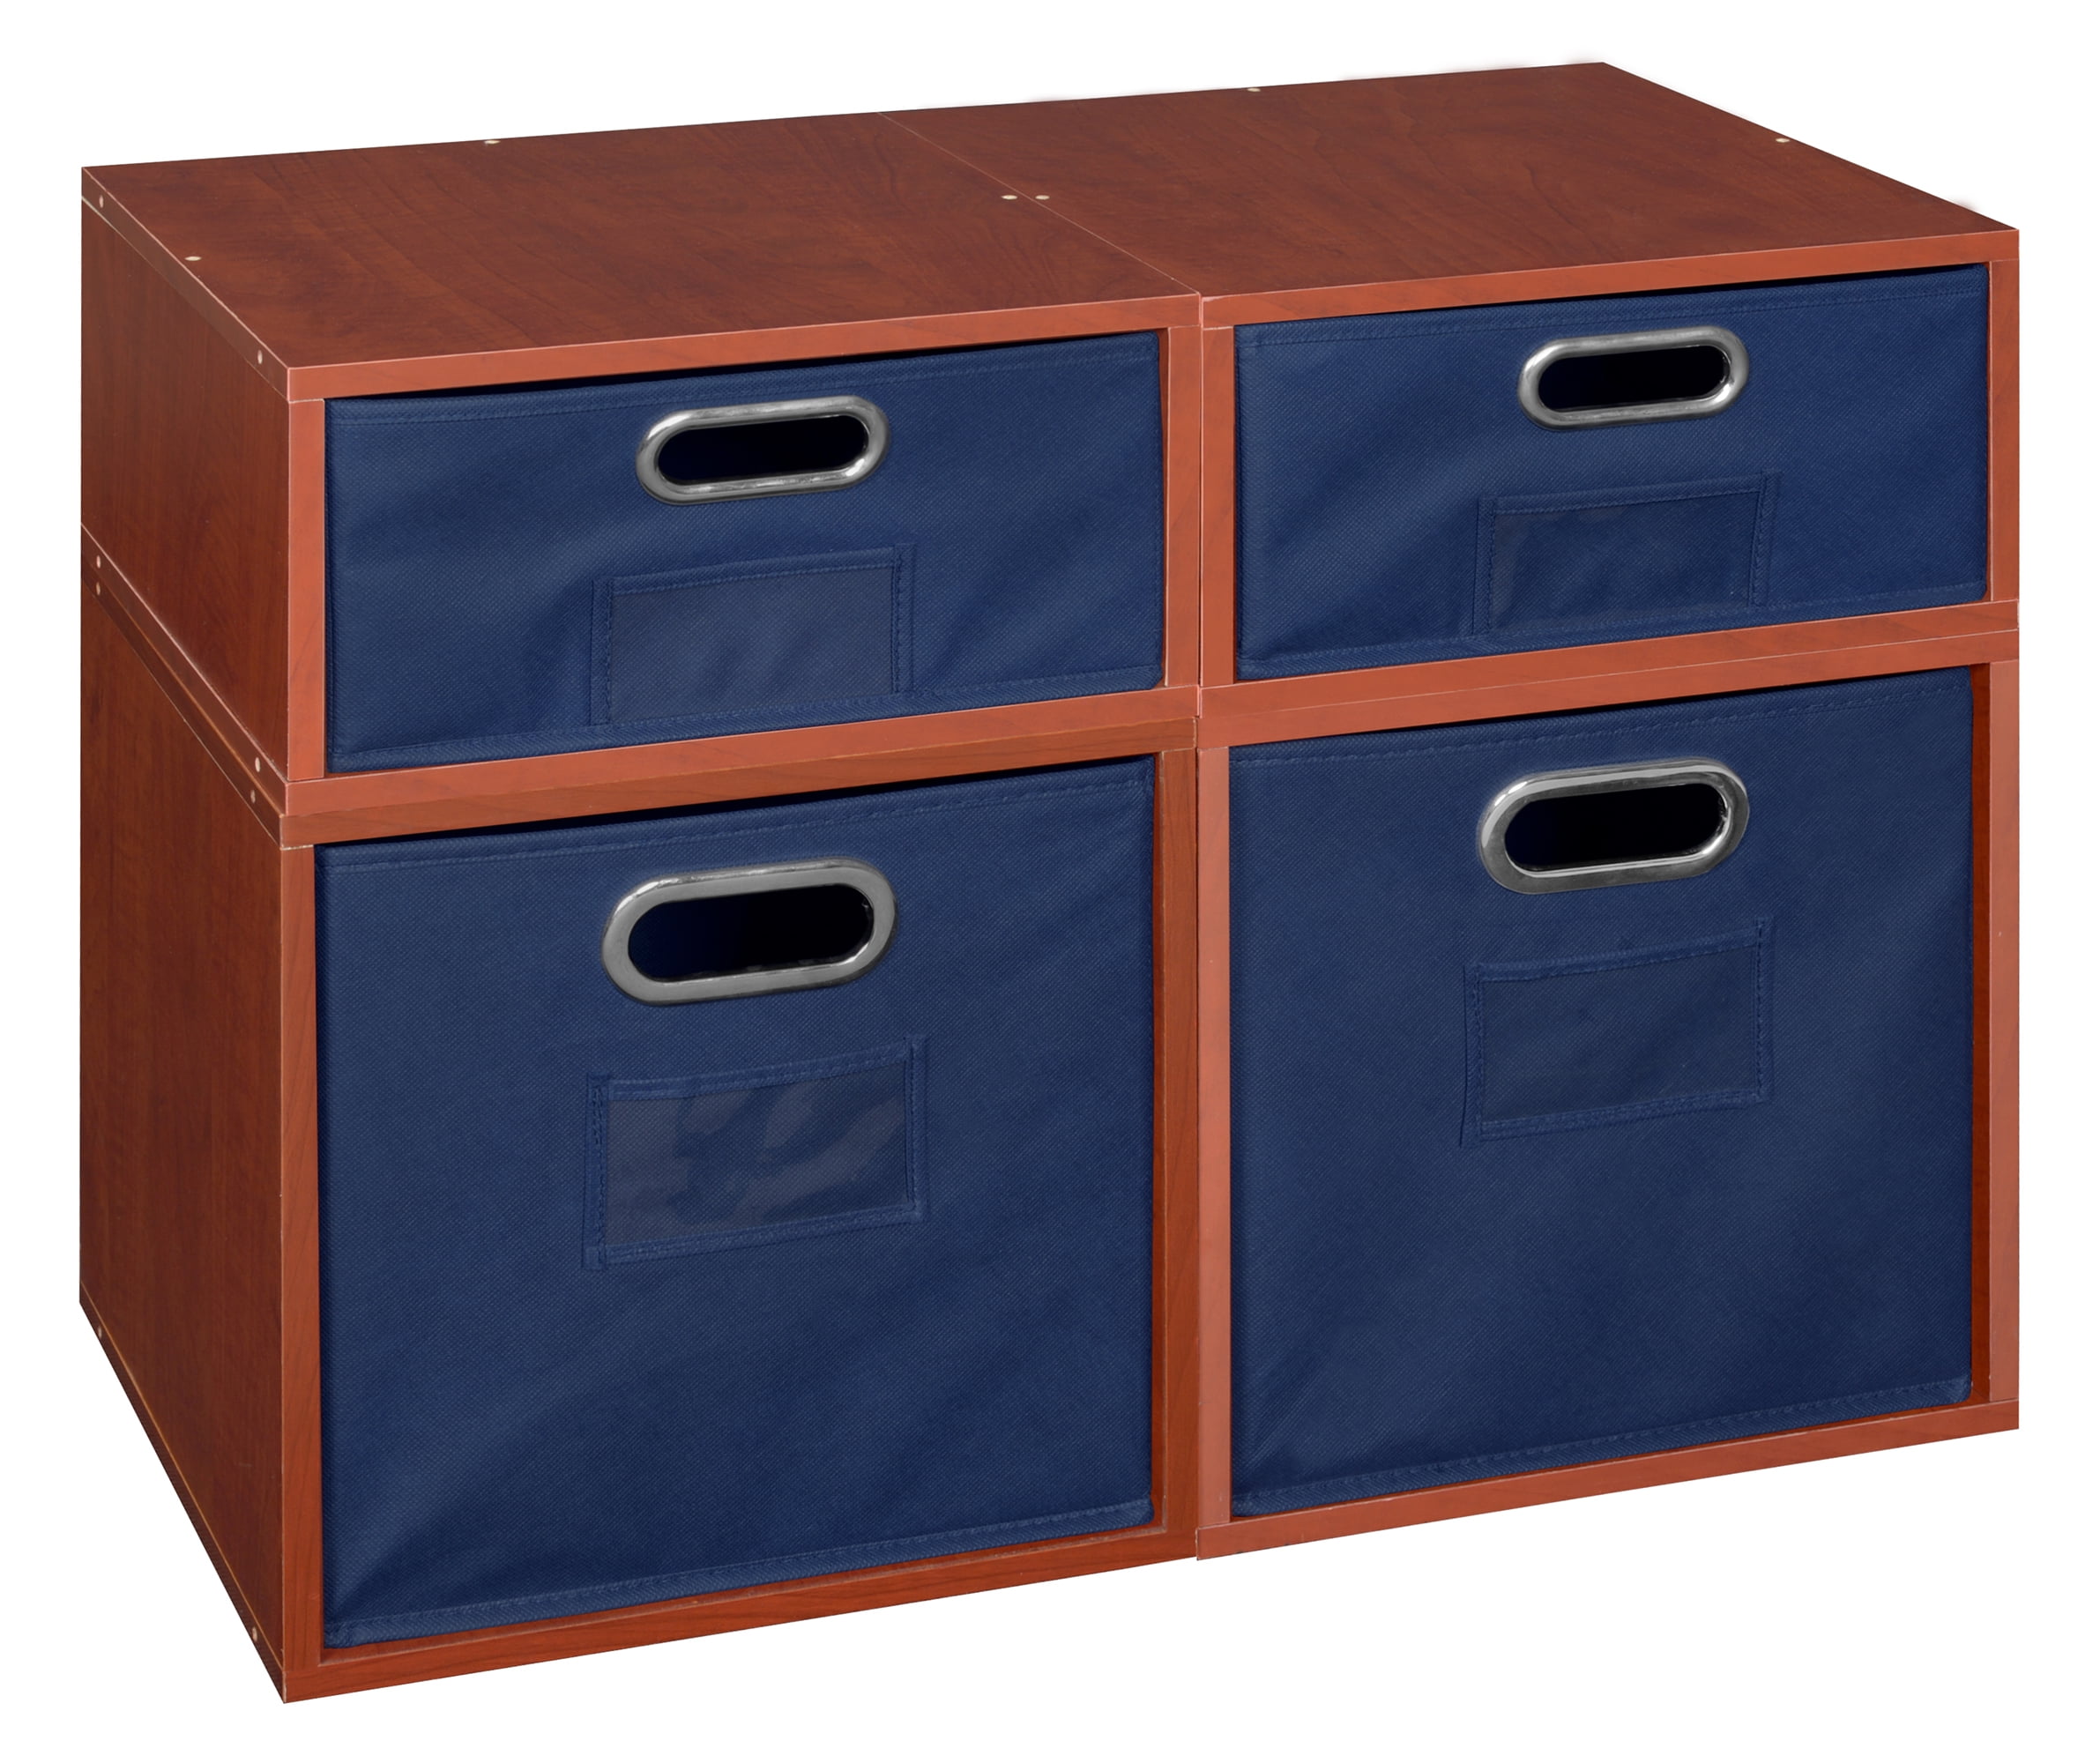 Niche Cubo Storage Set- 2 Full Cubes/2 Half Cubes with Foldable Storage ...